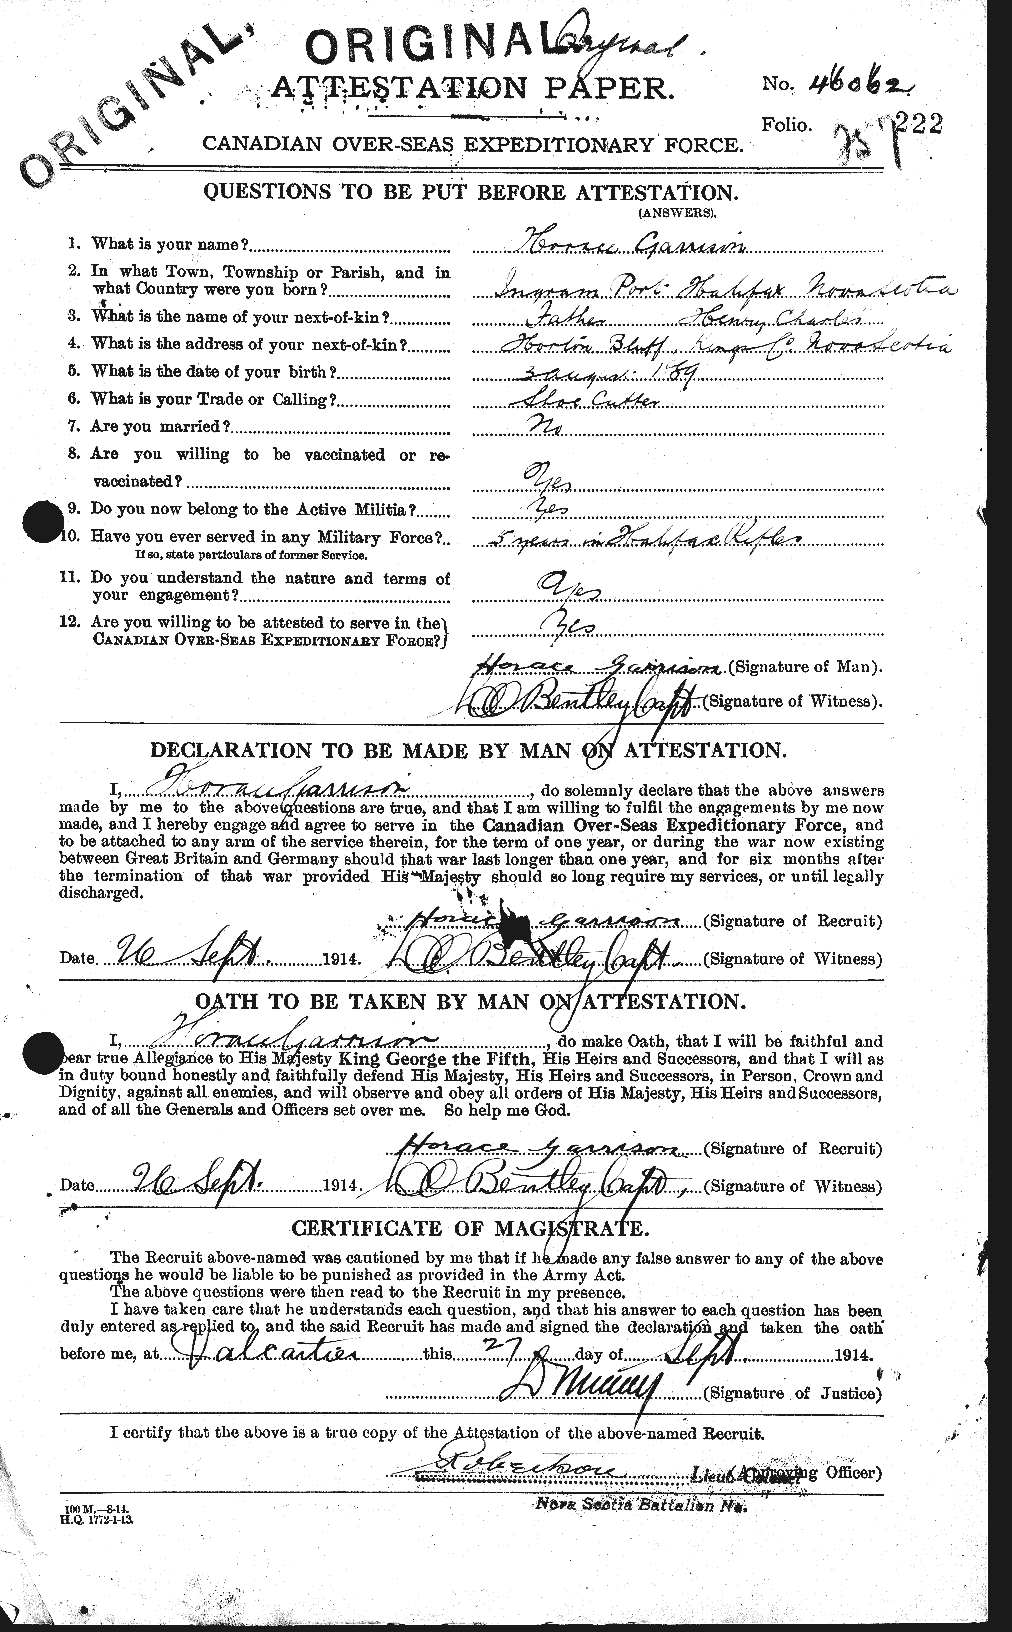 Personnel Records of the First World War - CEF 343394a